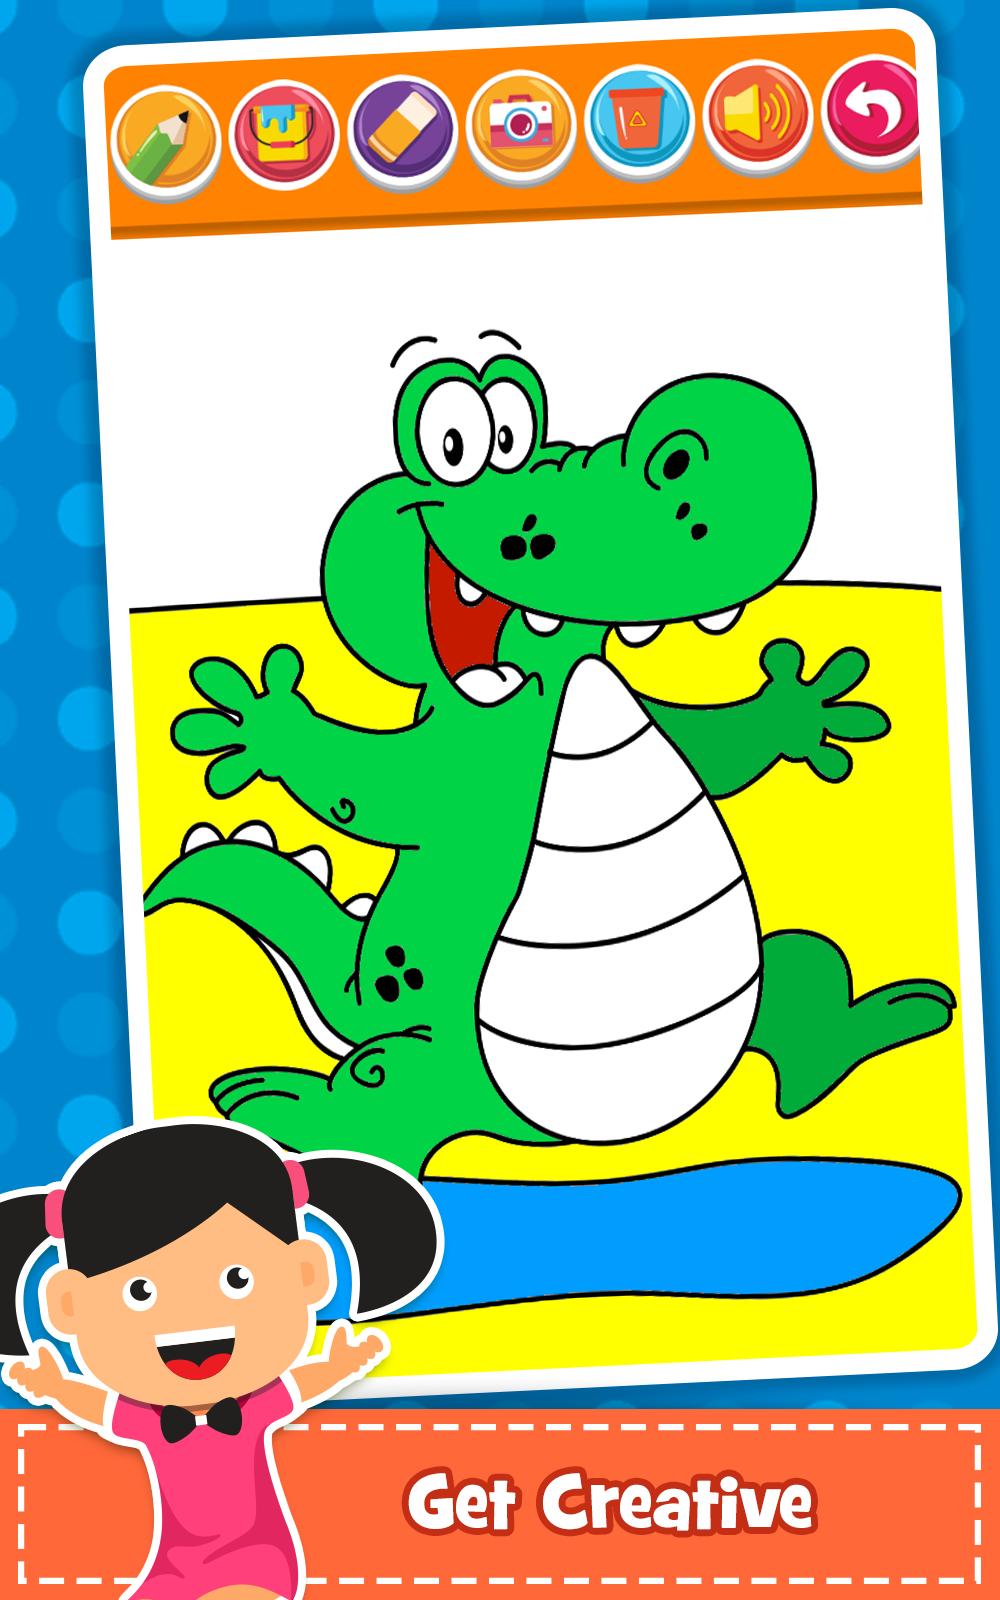 Download Coloring Games : PreSchool Coloring Book for kids for Android - APK Download